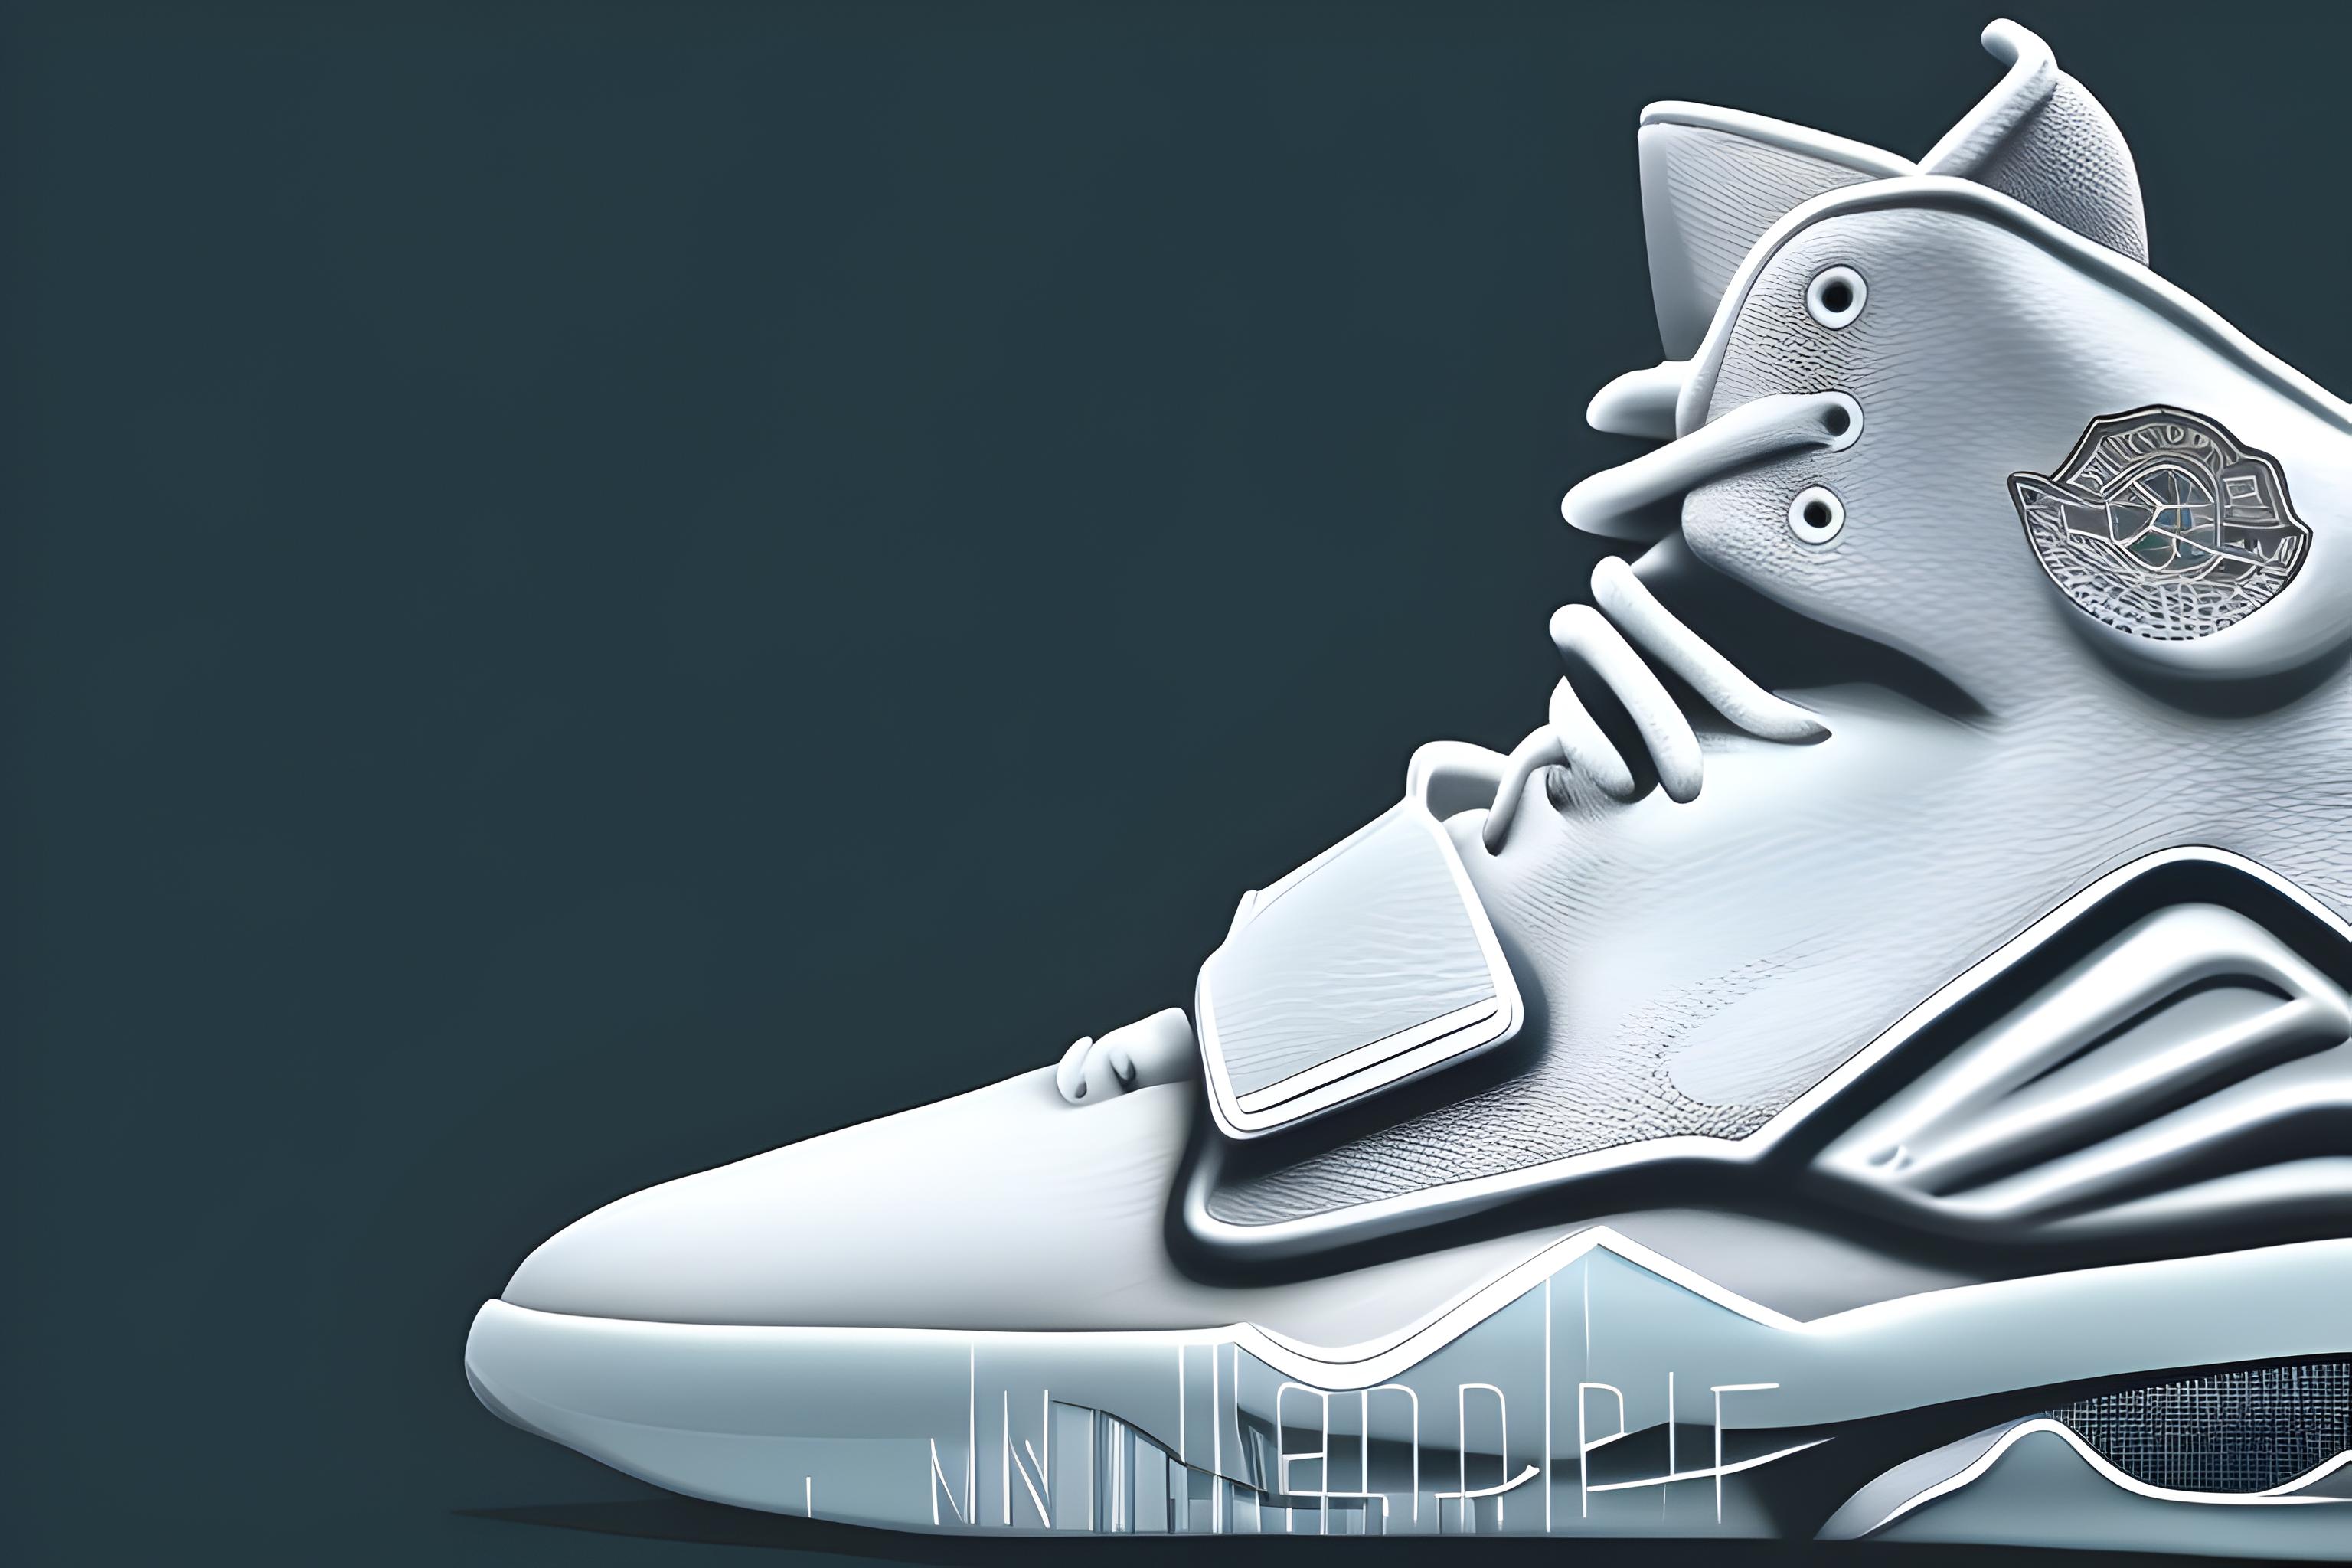 make a wallpaper with many sneakers like nike jordan adidas and yeezy ...